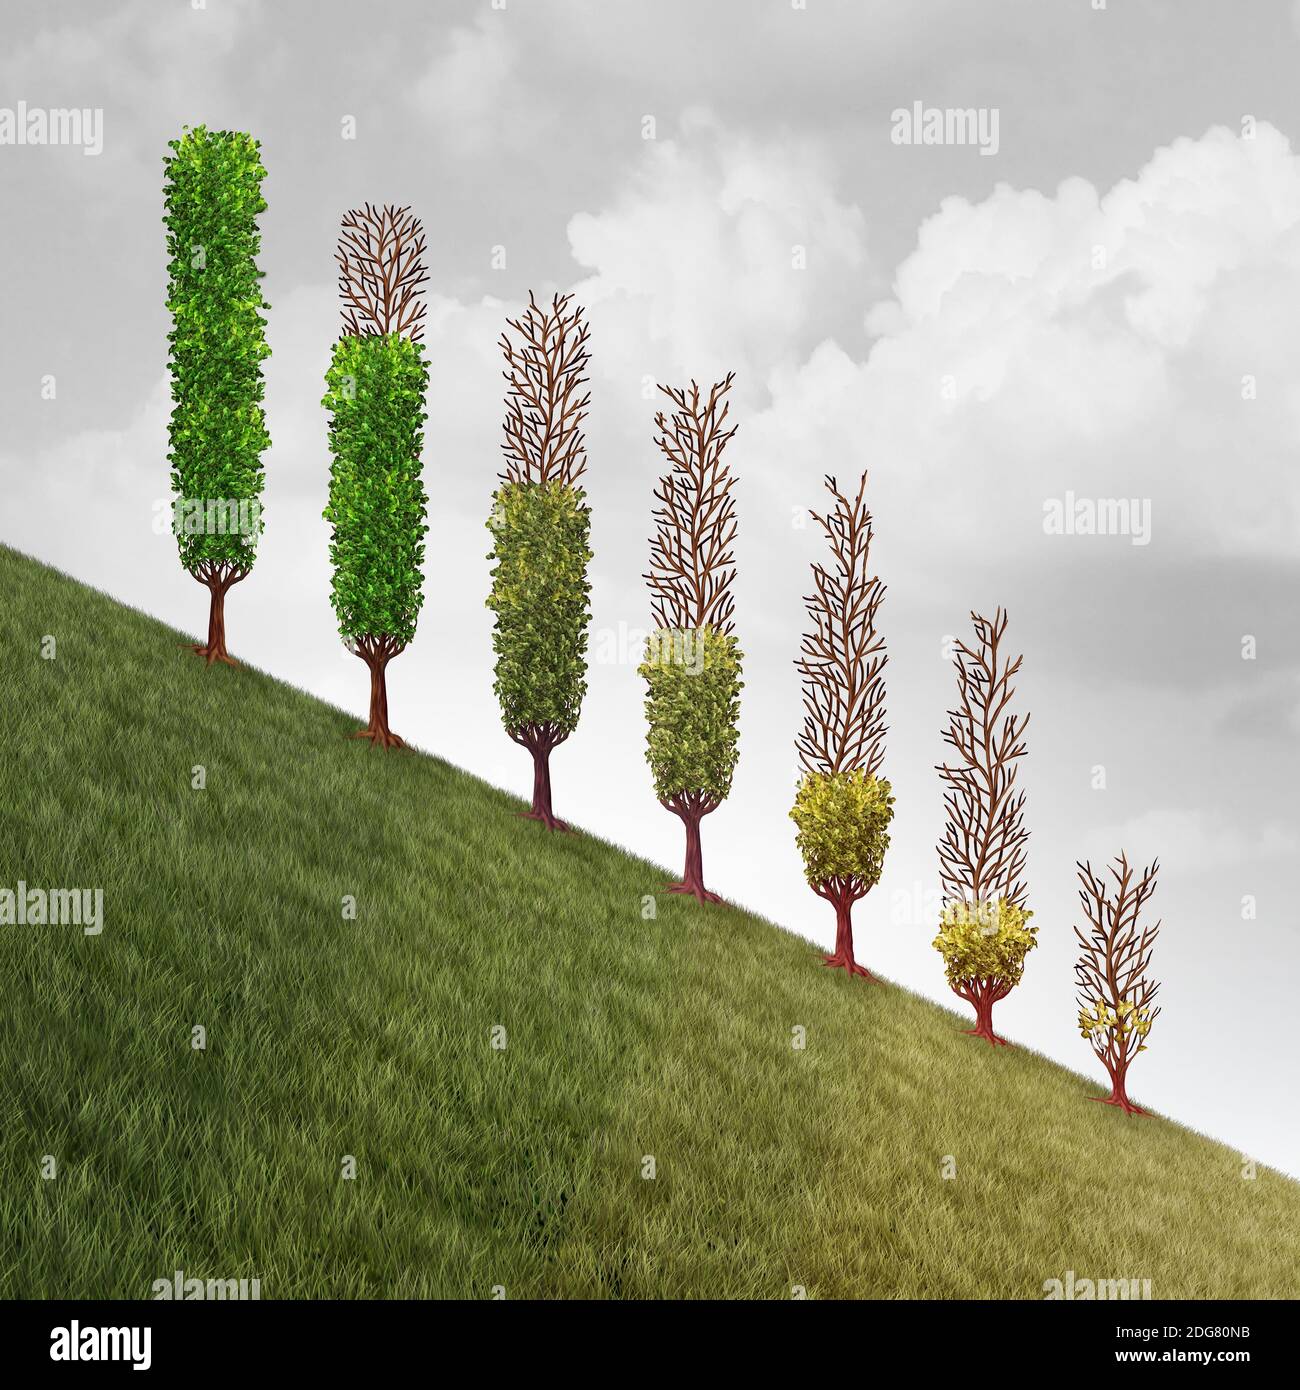 Recession business concept and economic activity decline or investing failure as losing money or savings with plants decreasing in height. Stock Photo